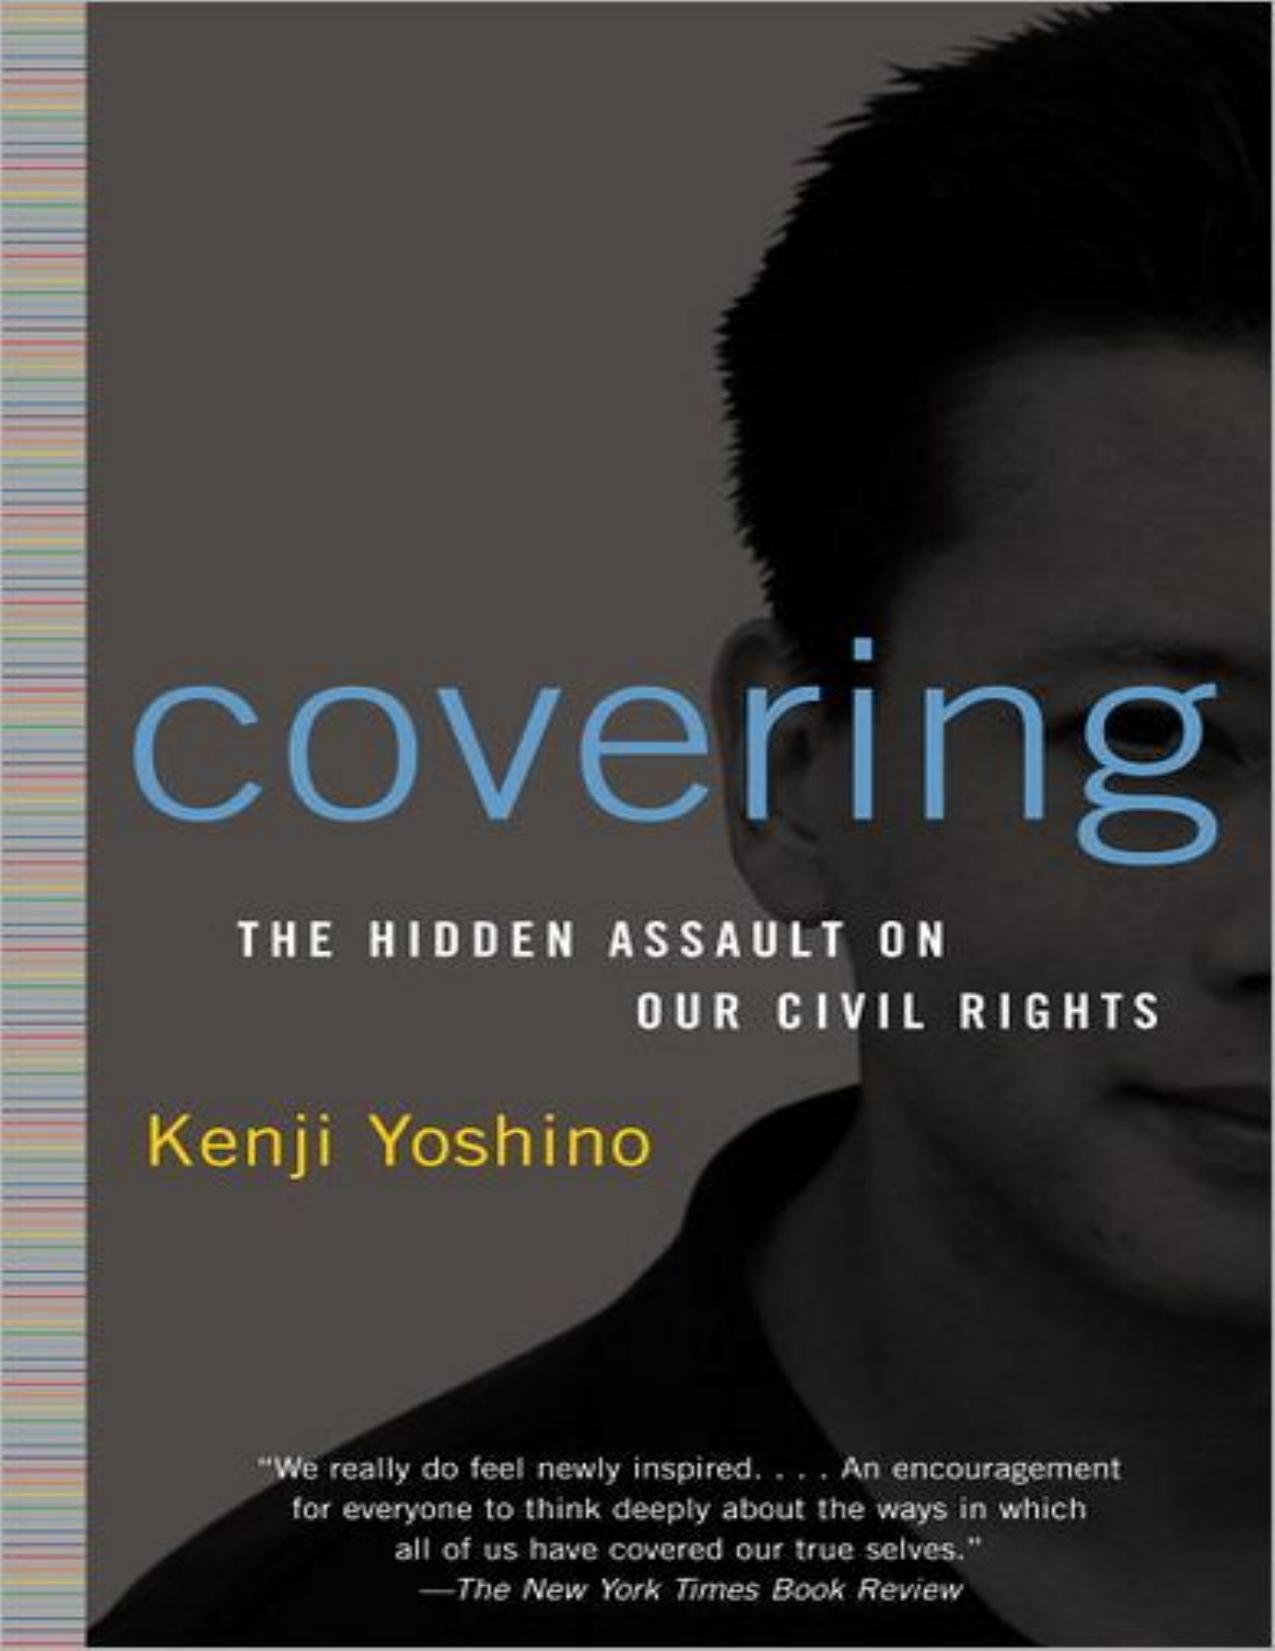 Covering:The Hidden Assault on American Civil Rights  by Kenji Yoshino